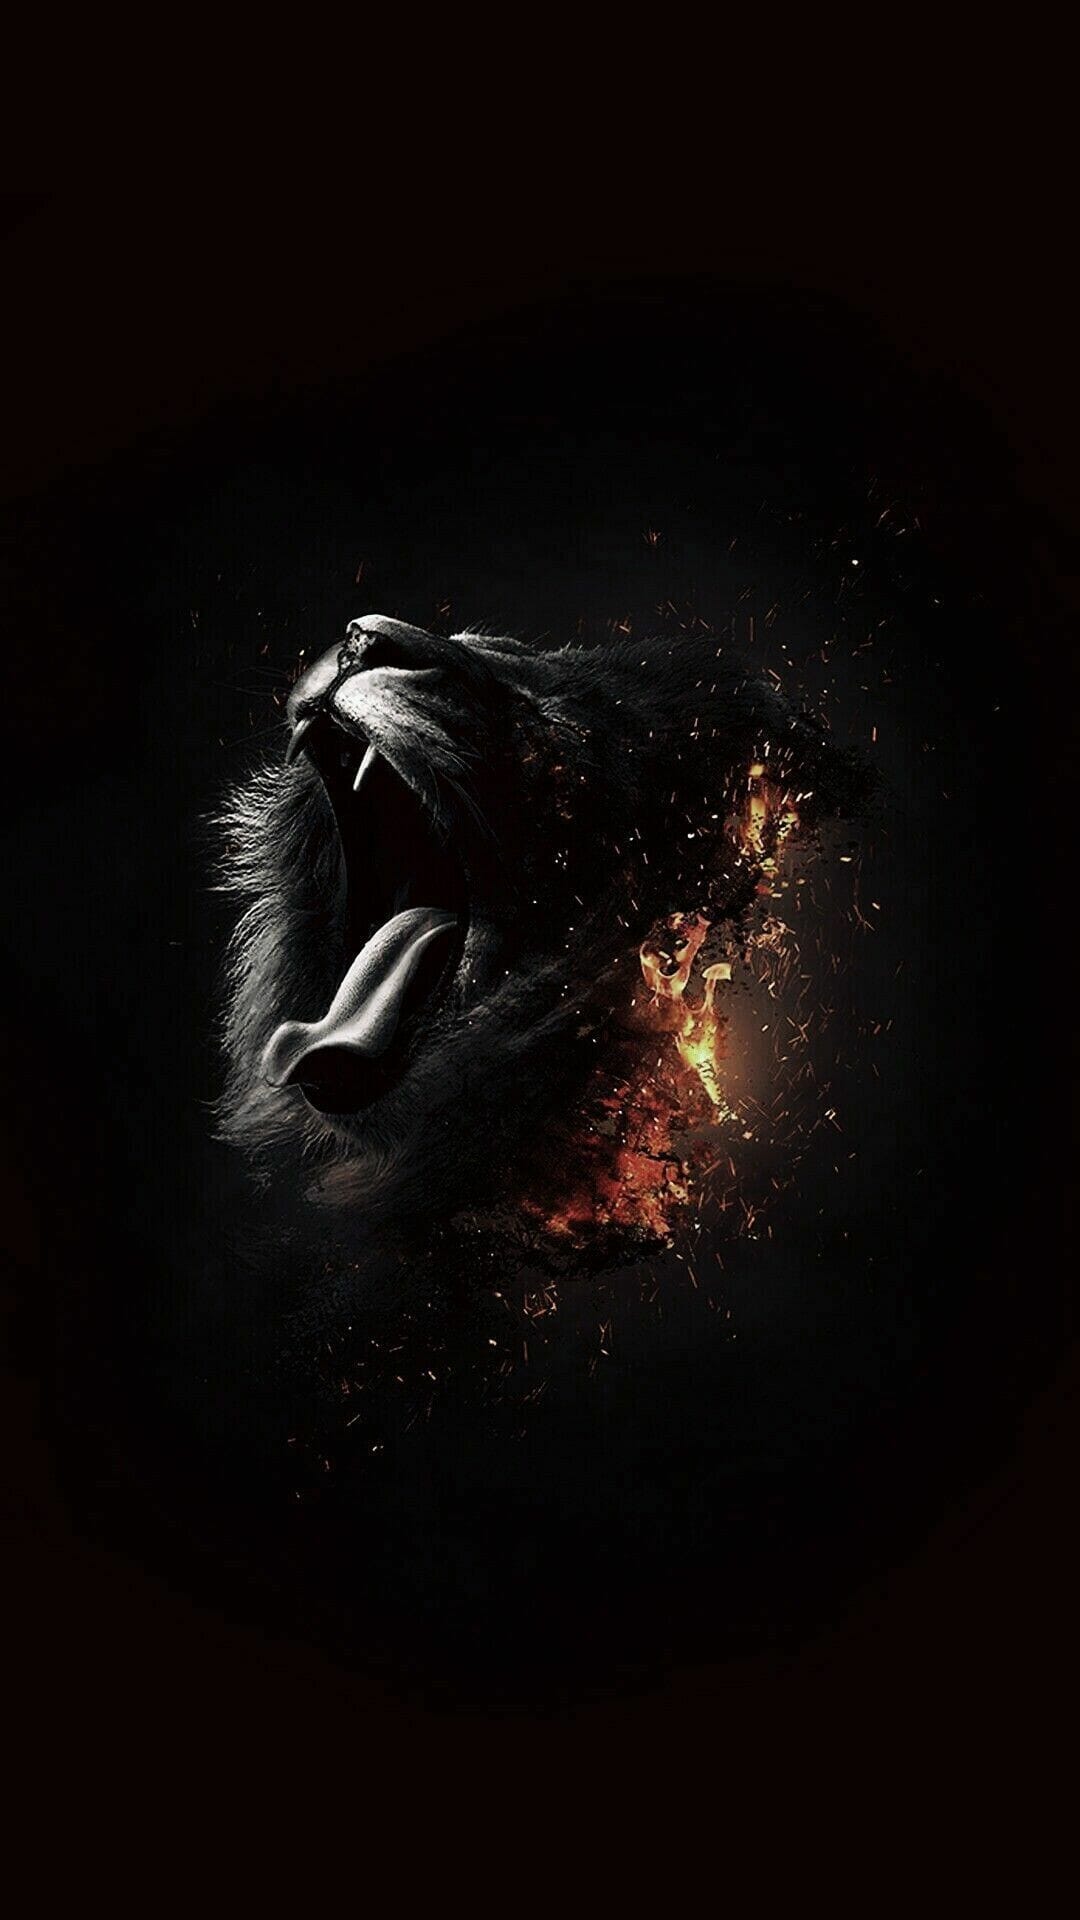 Badass Aesthetic Background Picture Is Best Wallpaper on fo, if you like it. in 2020. Lion wallpaper, iPhone wallpaper iphone x, Lion wallpaper iphone / iPhone HD Wallpaper Backgrou (png / jpg)